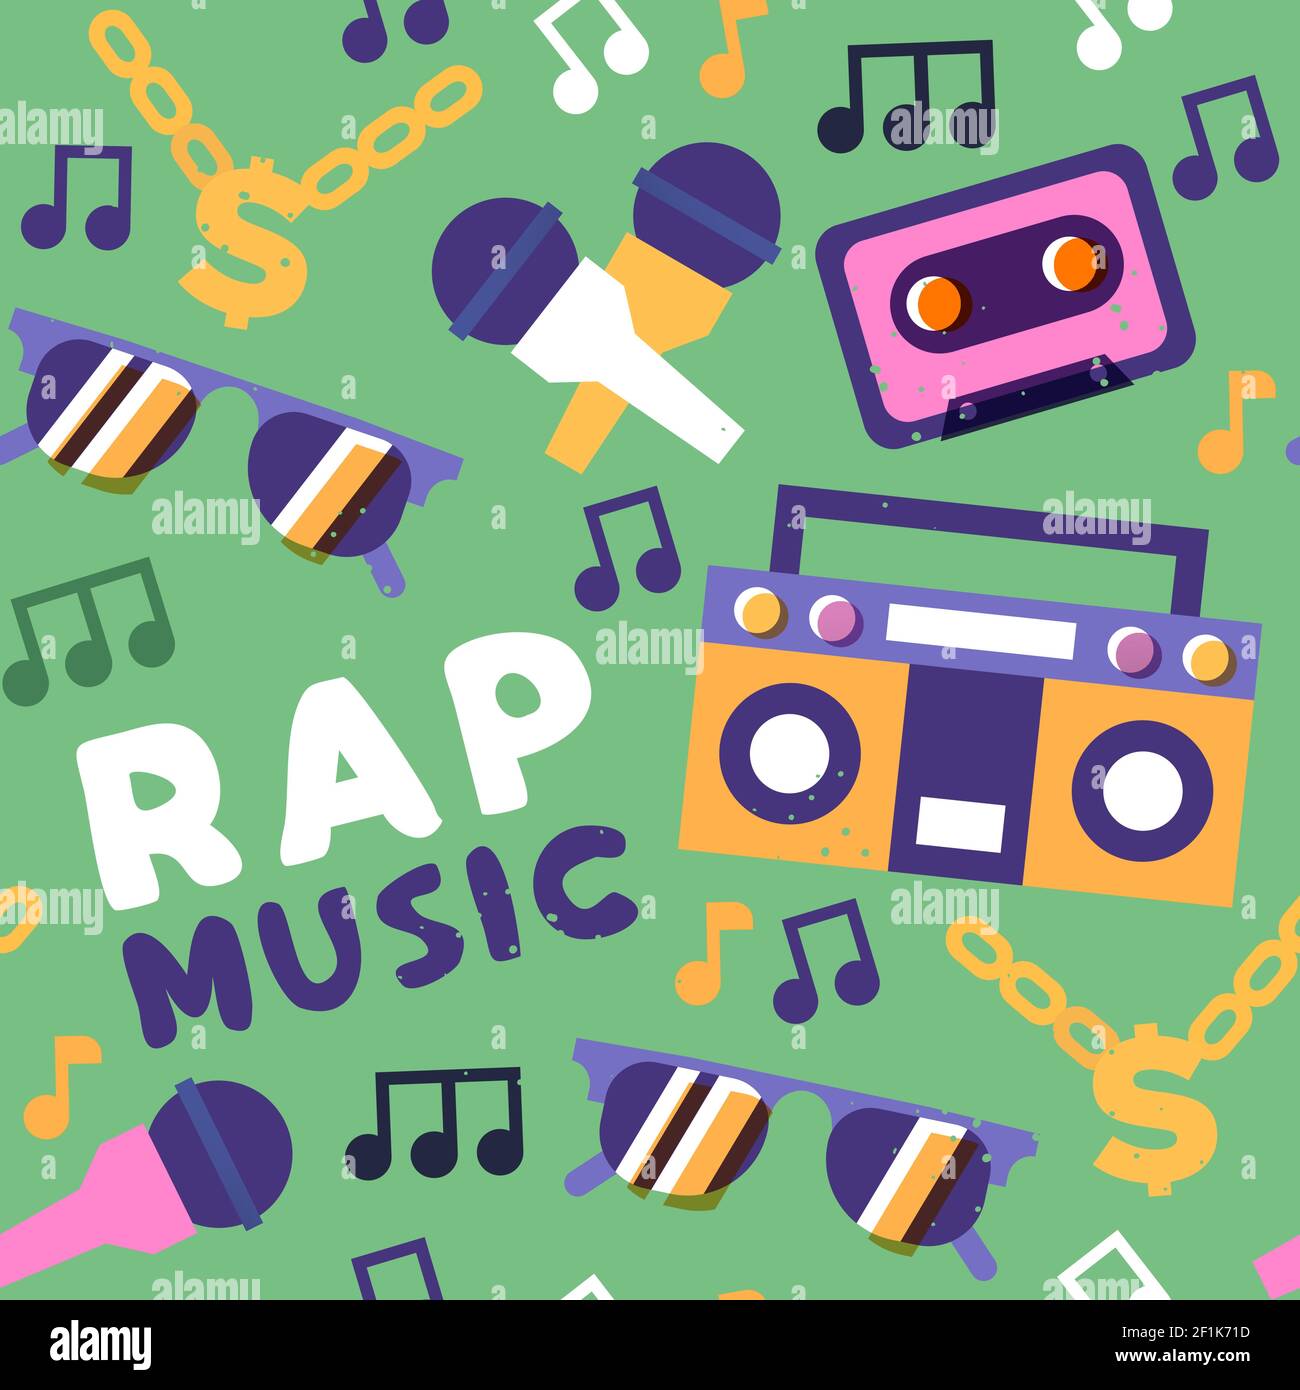 Rap music seamless pattern illustration of colorful retro style hip hop musical icons. Urban street background with microphone, gold chain, mixtape. Stock Vector